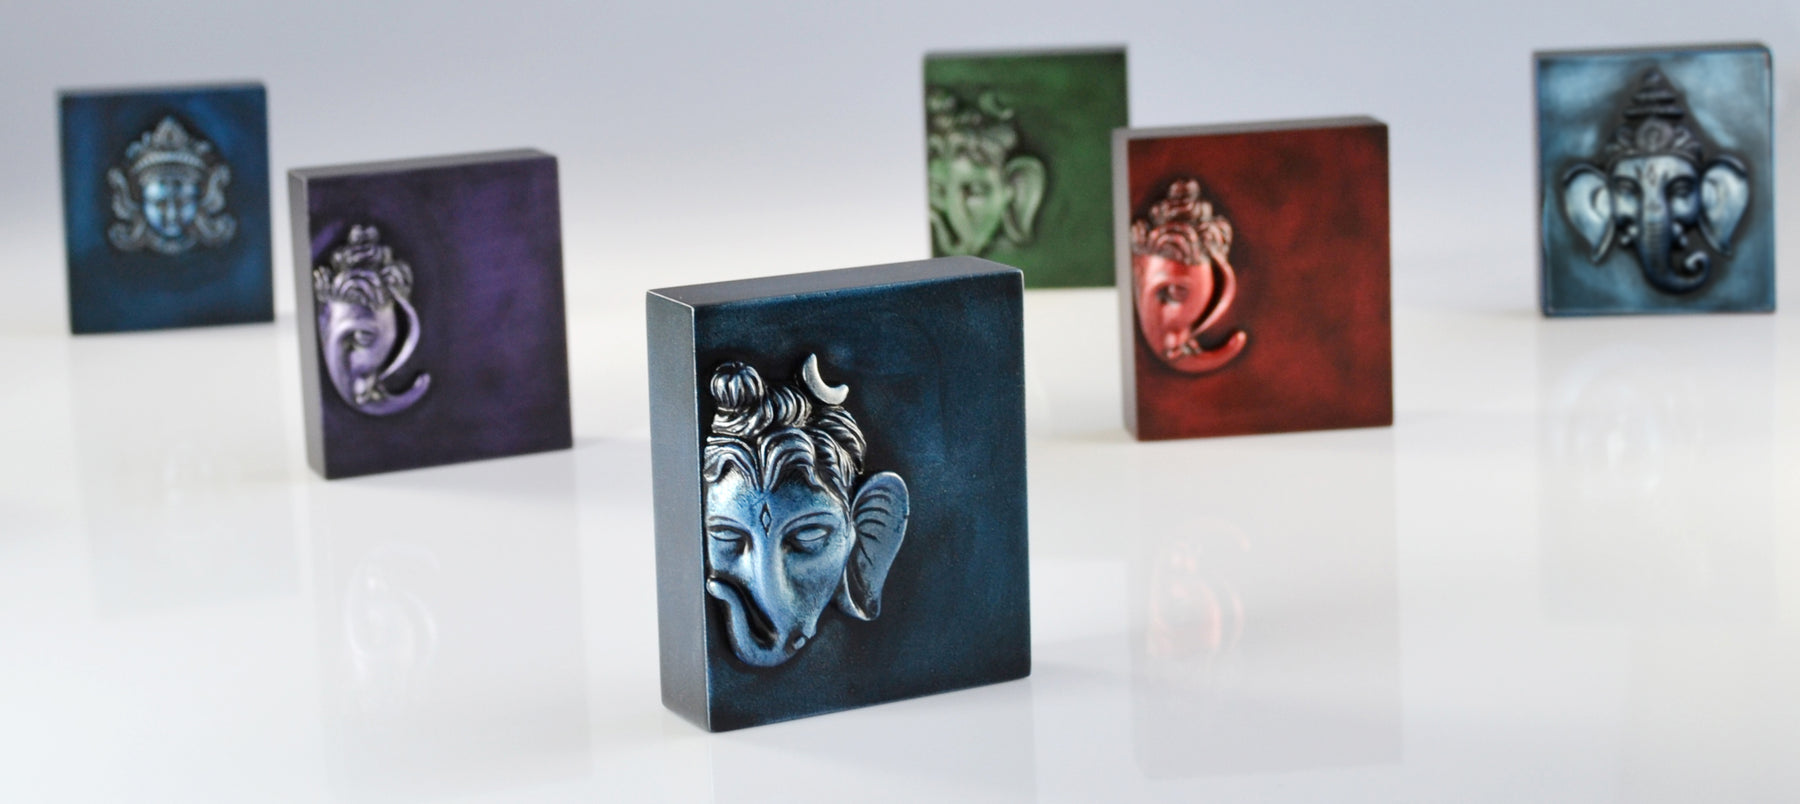 A Beautiful Gift Idea for Diwali & Ganesh Chaturthi Something Different. Not a Typical Gift.